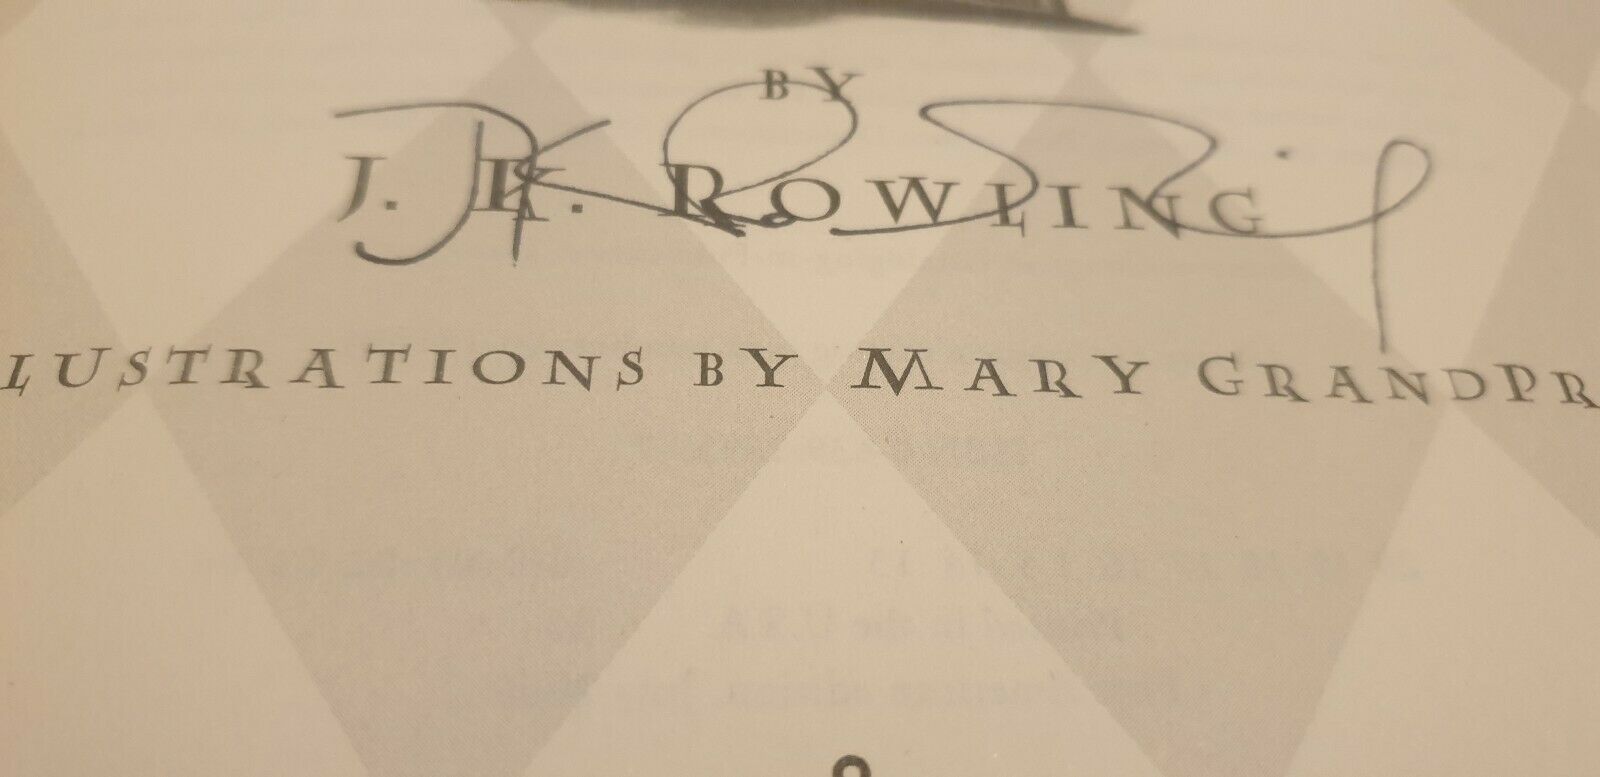 J.K. Rowling Forgery found inside a US 1st Edition Harry Potter and the Goblet of Fire on eBay